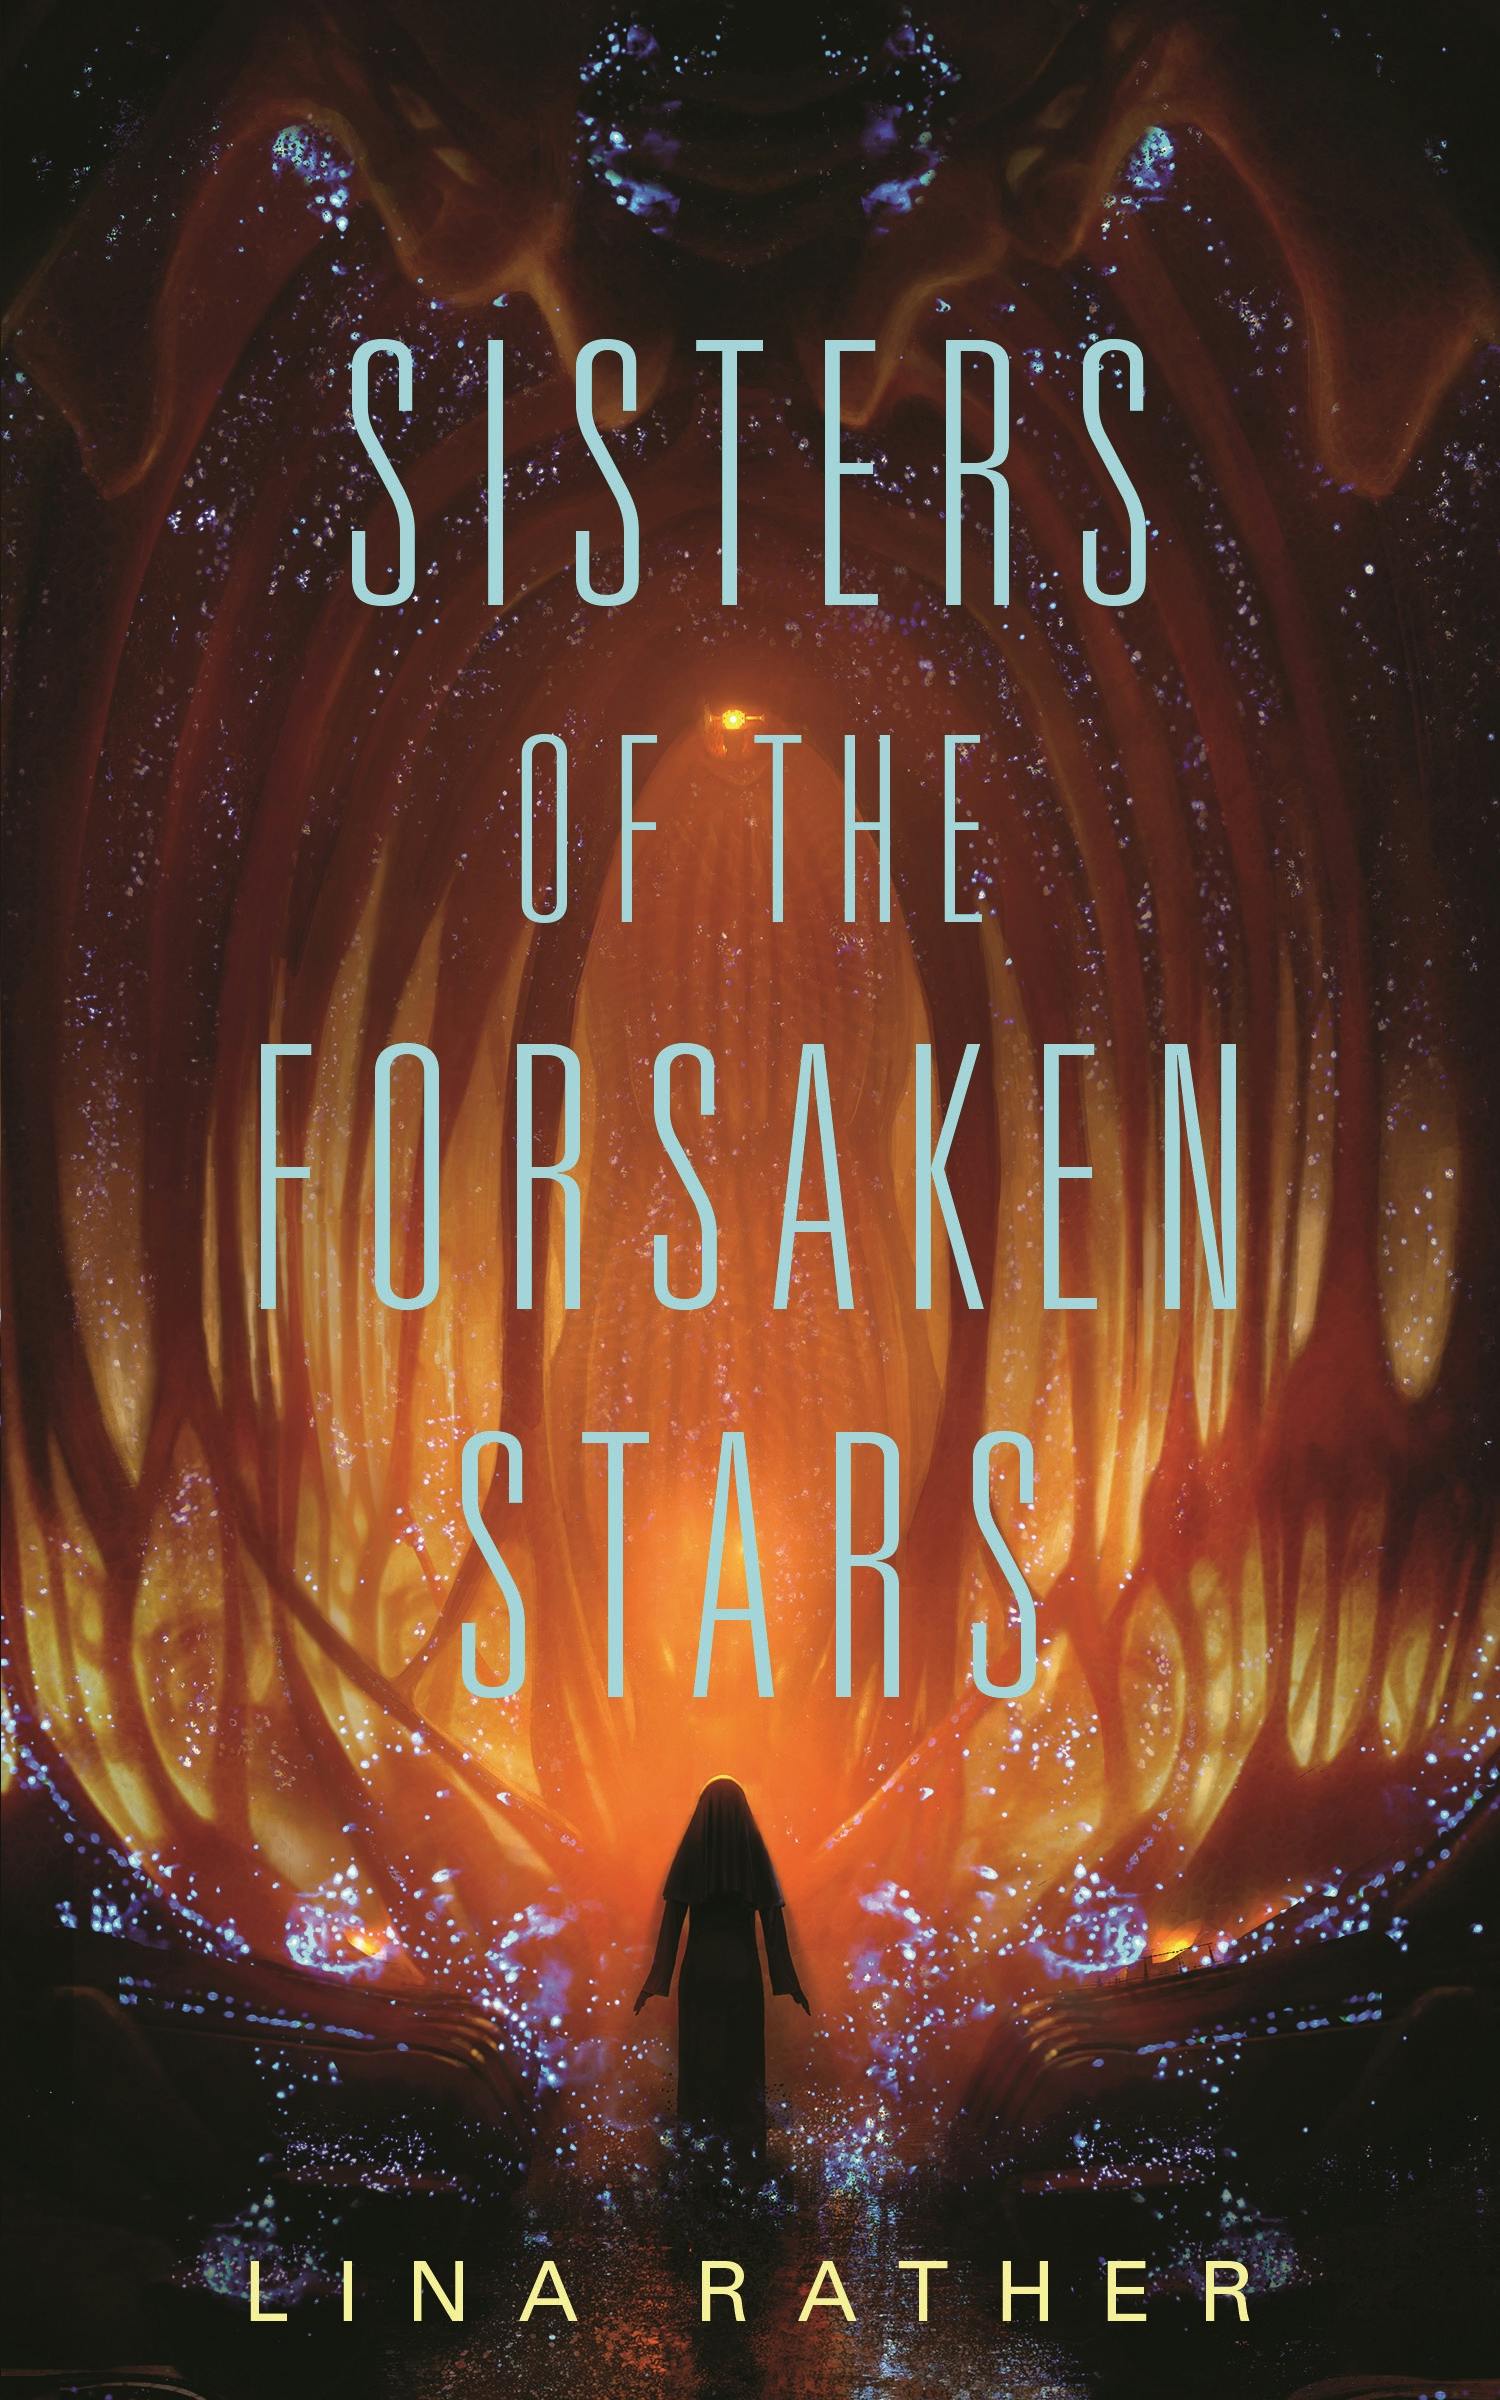 Cover for the book titled as: Sisters of the Forsaken Stars